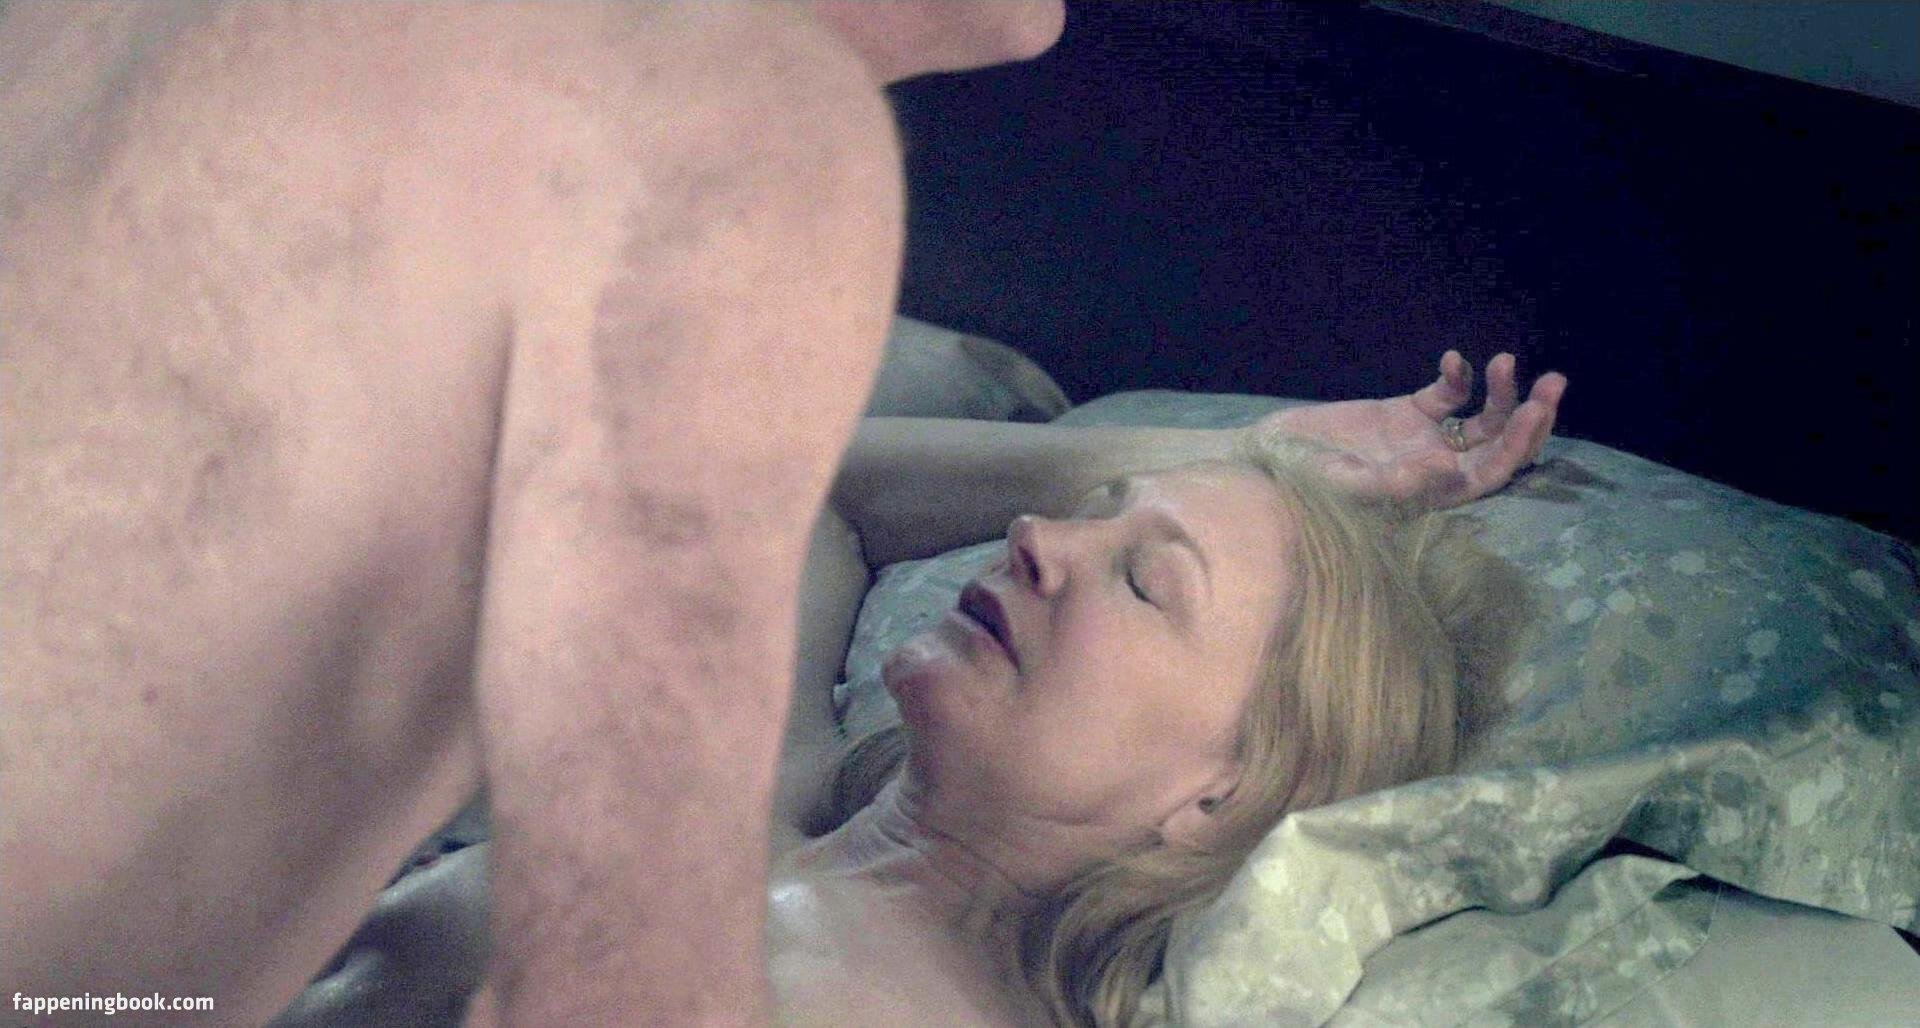 Patricia Clarkson Nude, The Fappening - Photo #436698 - FappeningBook.